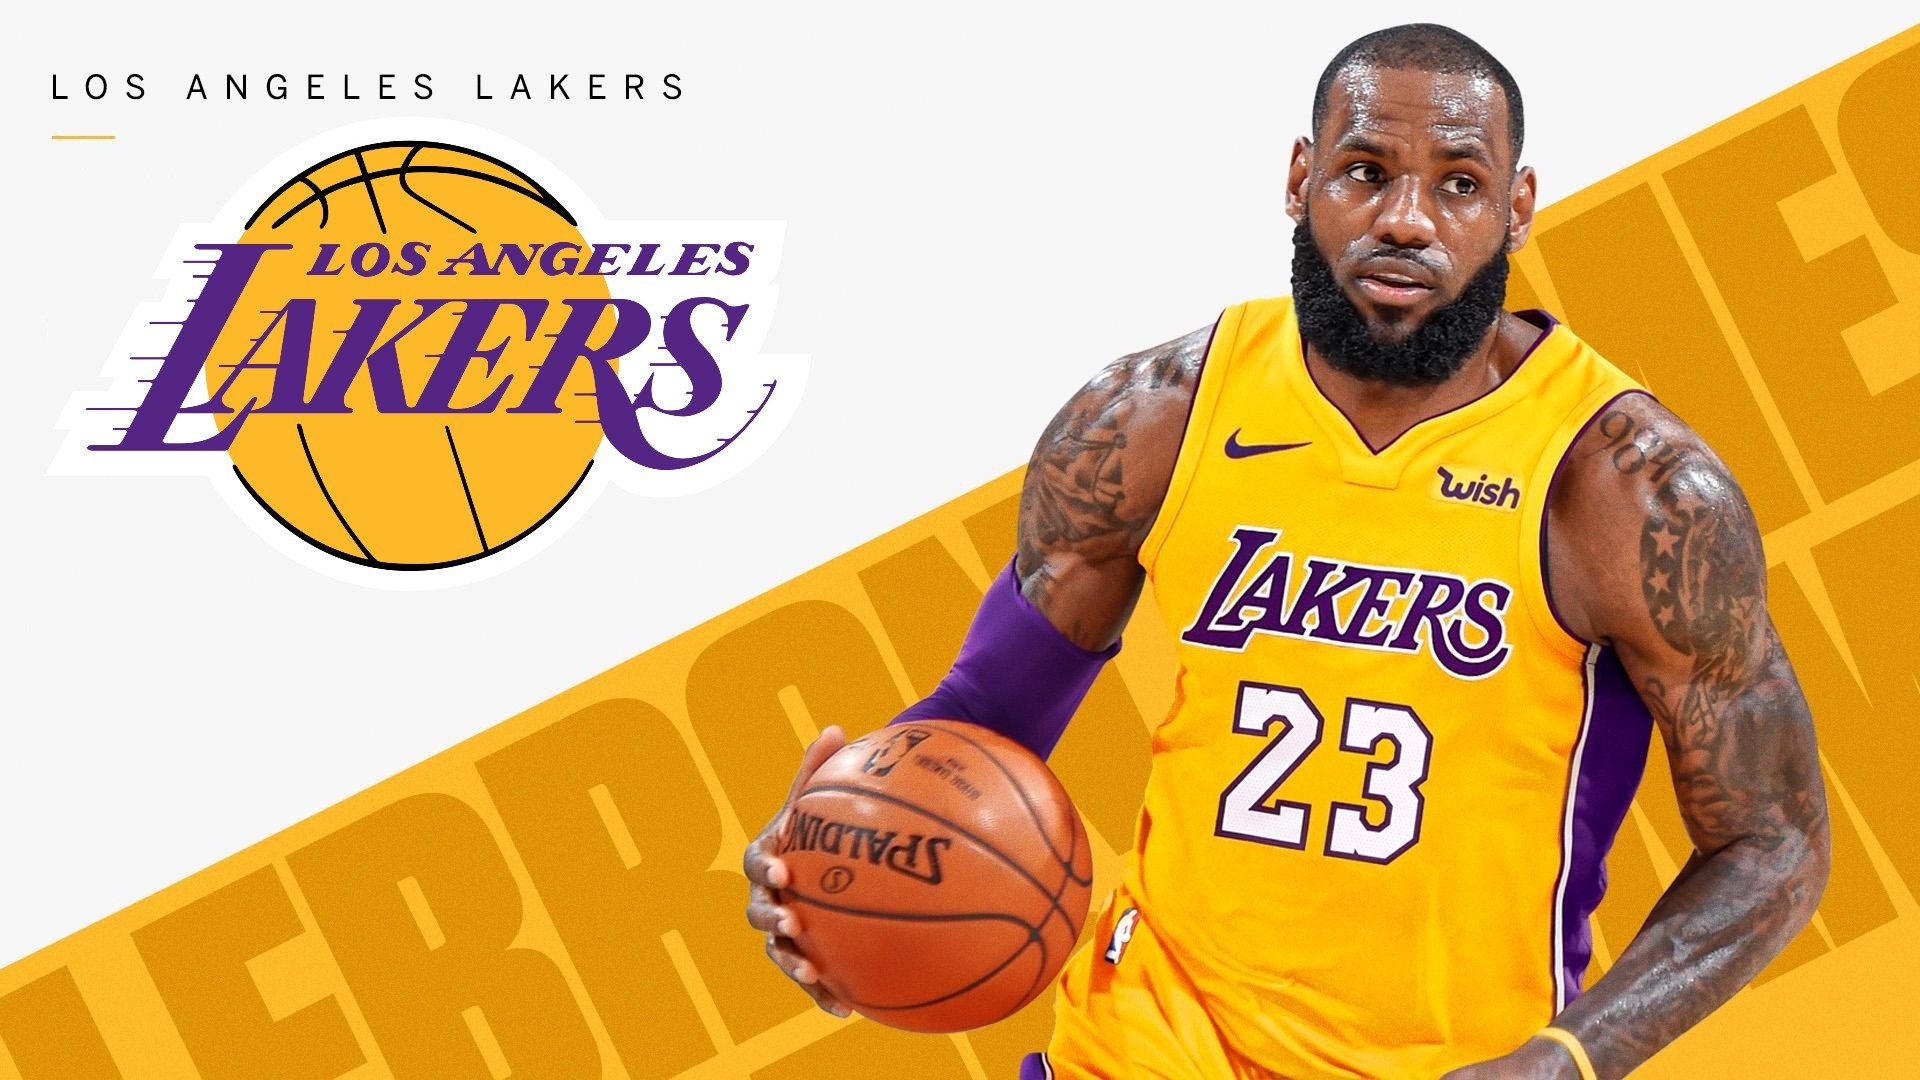 1920x1080 LeBron James Lakers Wallpaper HD with image dimensions  pixel. You  can make this wallpaper